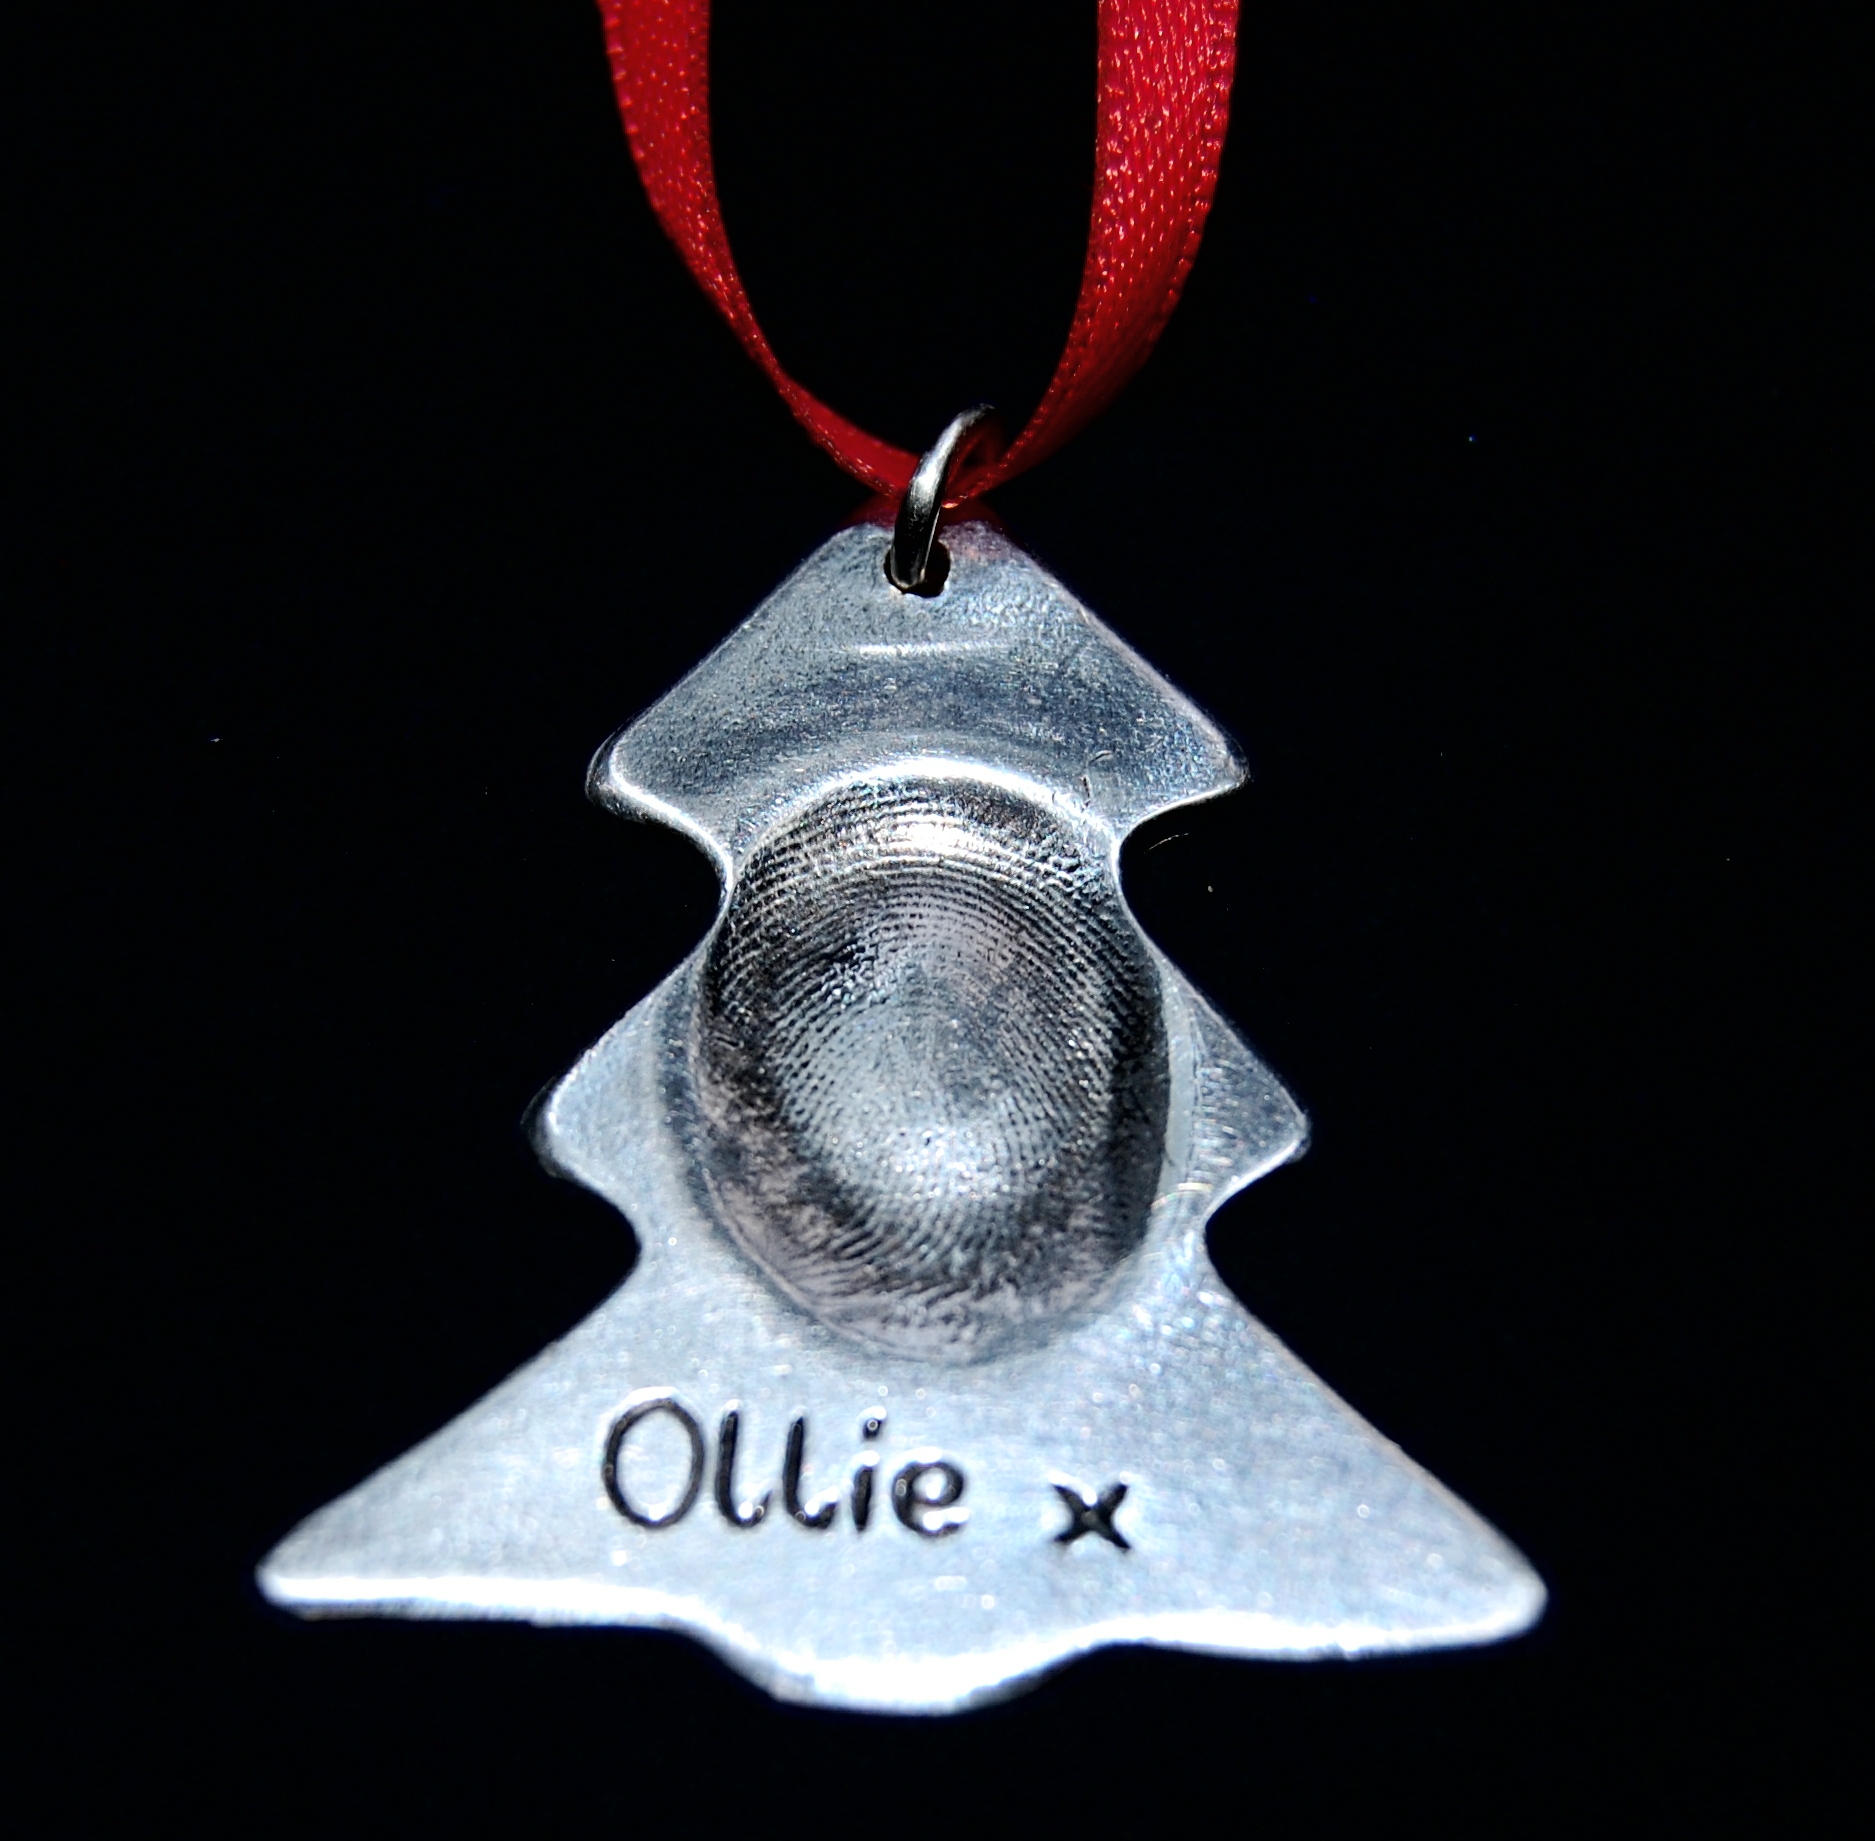 Stunning silver Christmas tree fingerprint charm. Presented on red ribbon, ready to hang on your tree.